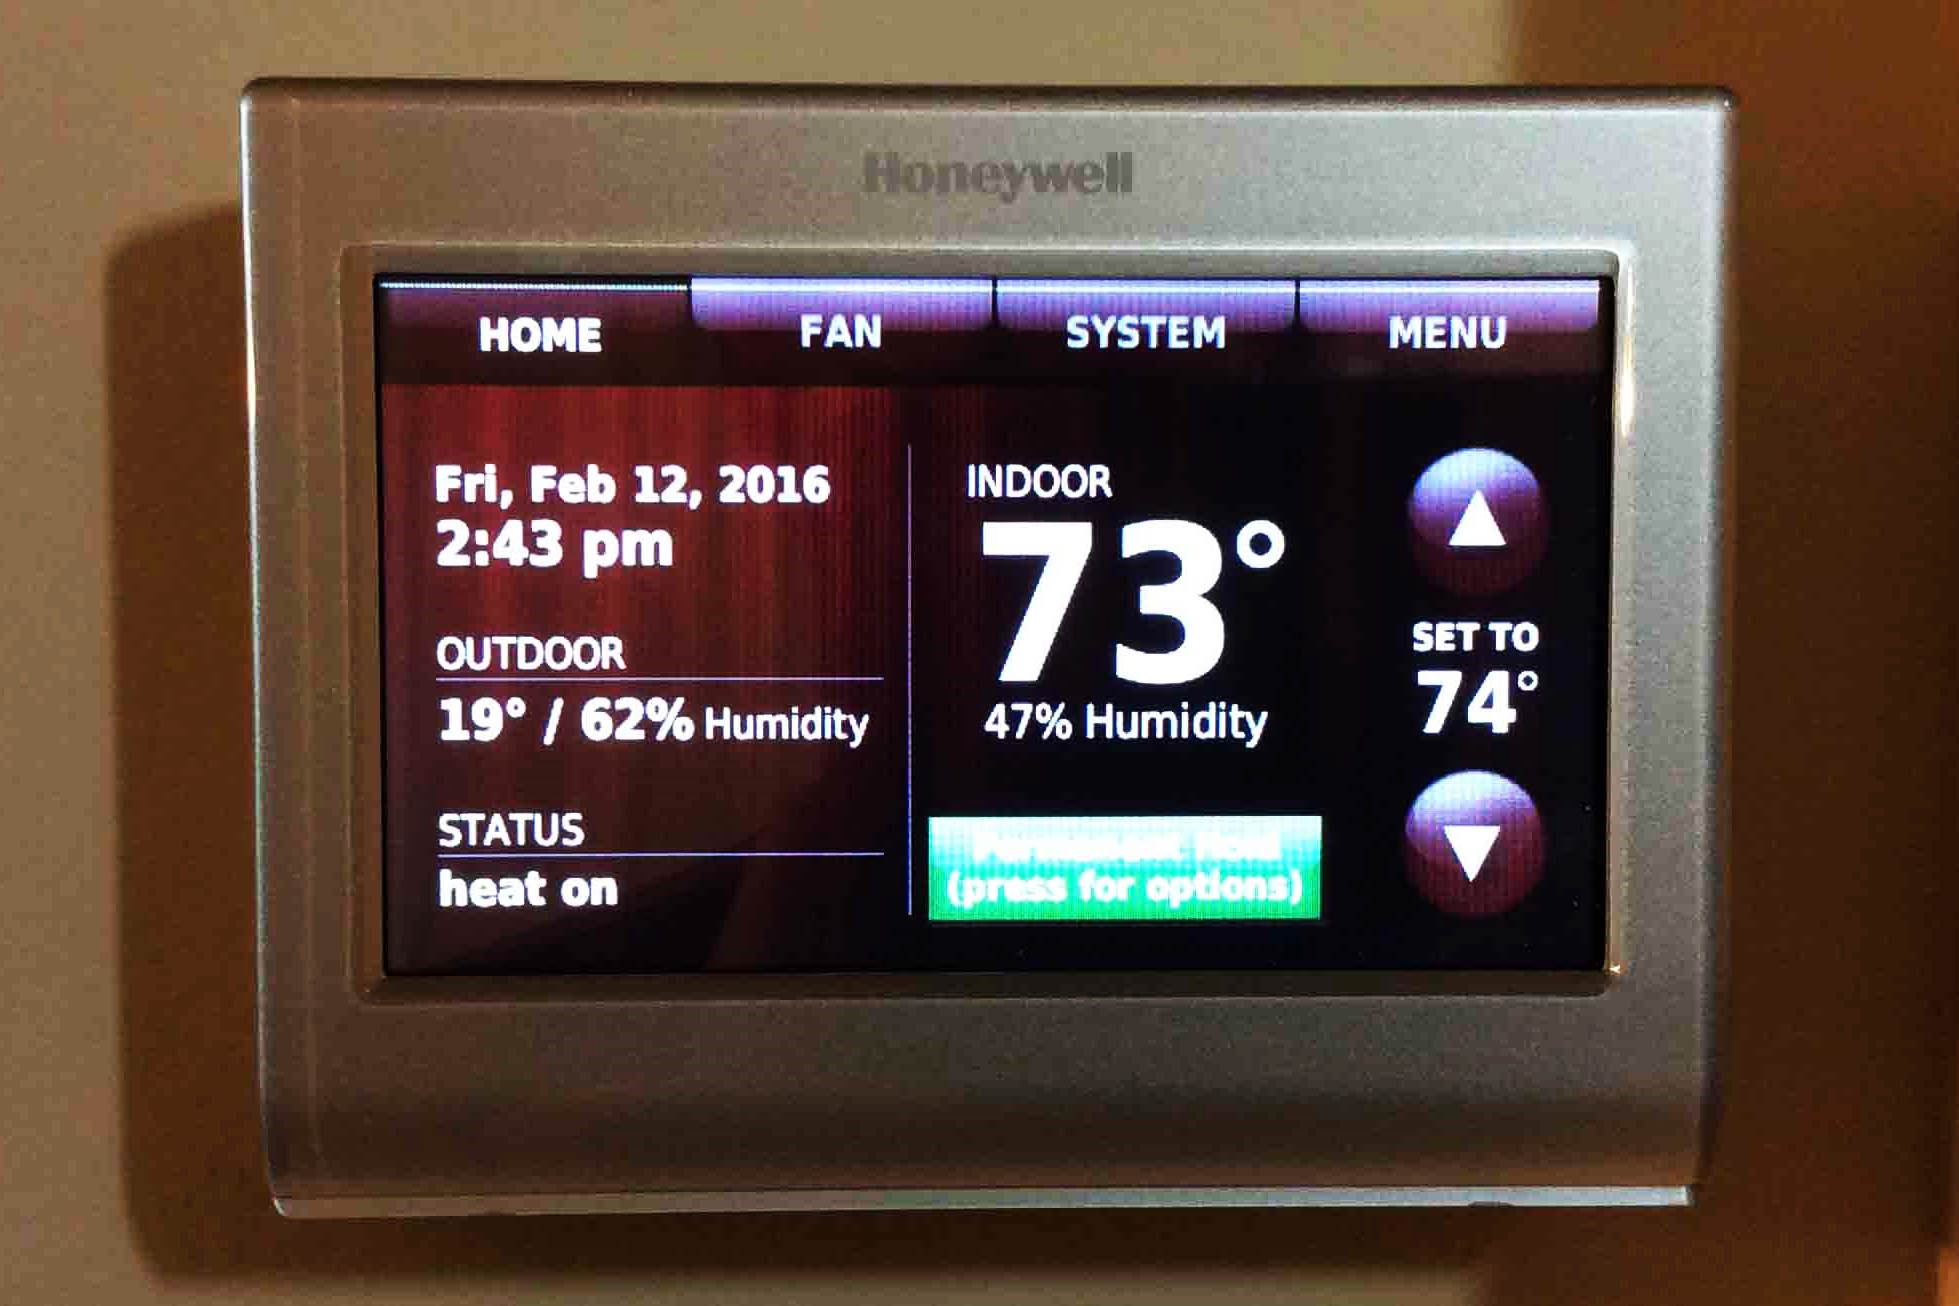 How To Connect Honeywell Smart Thermostat To Amazon Echo Dot